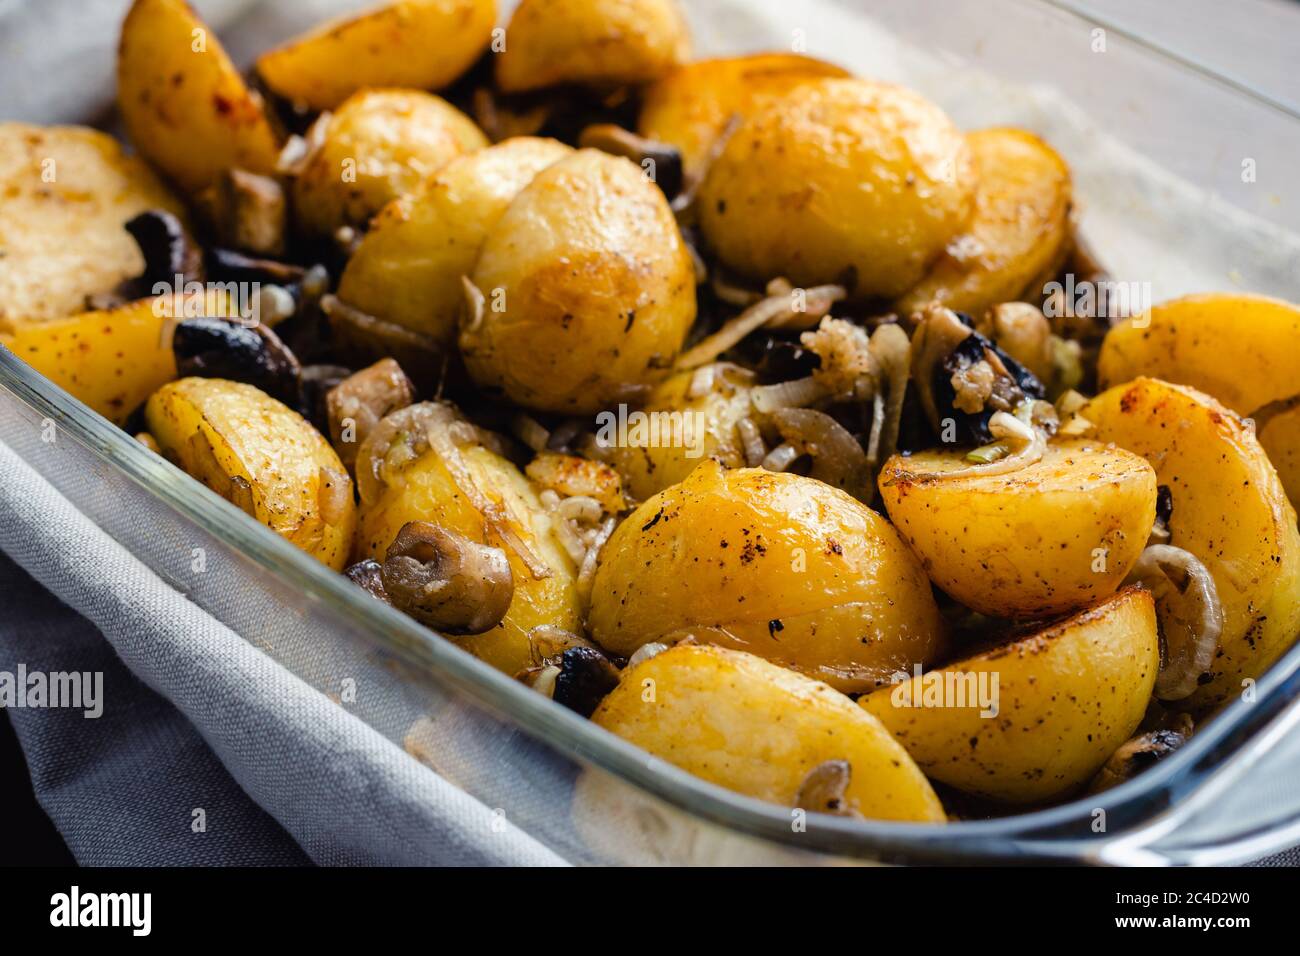 Roasted young potatoes in glass baking dish with mushrooms. Angle view, Stock Photo